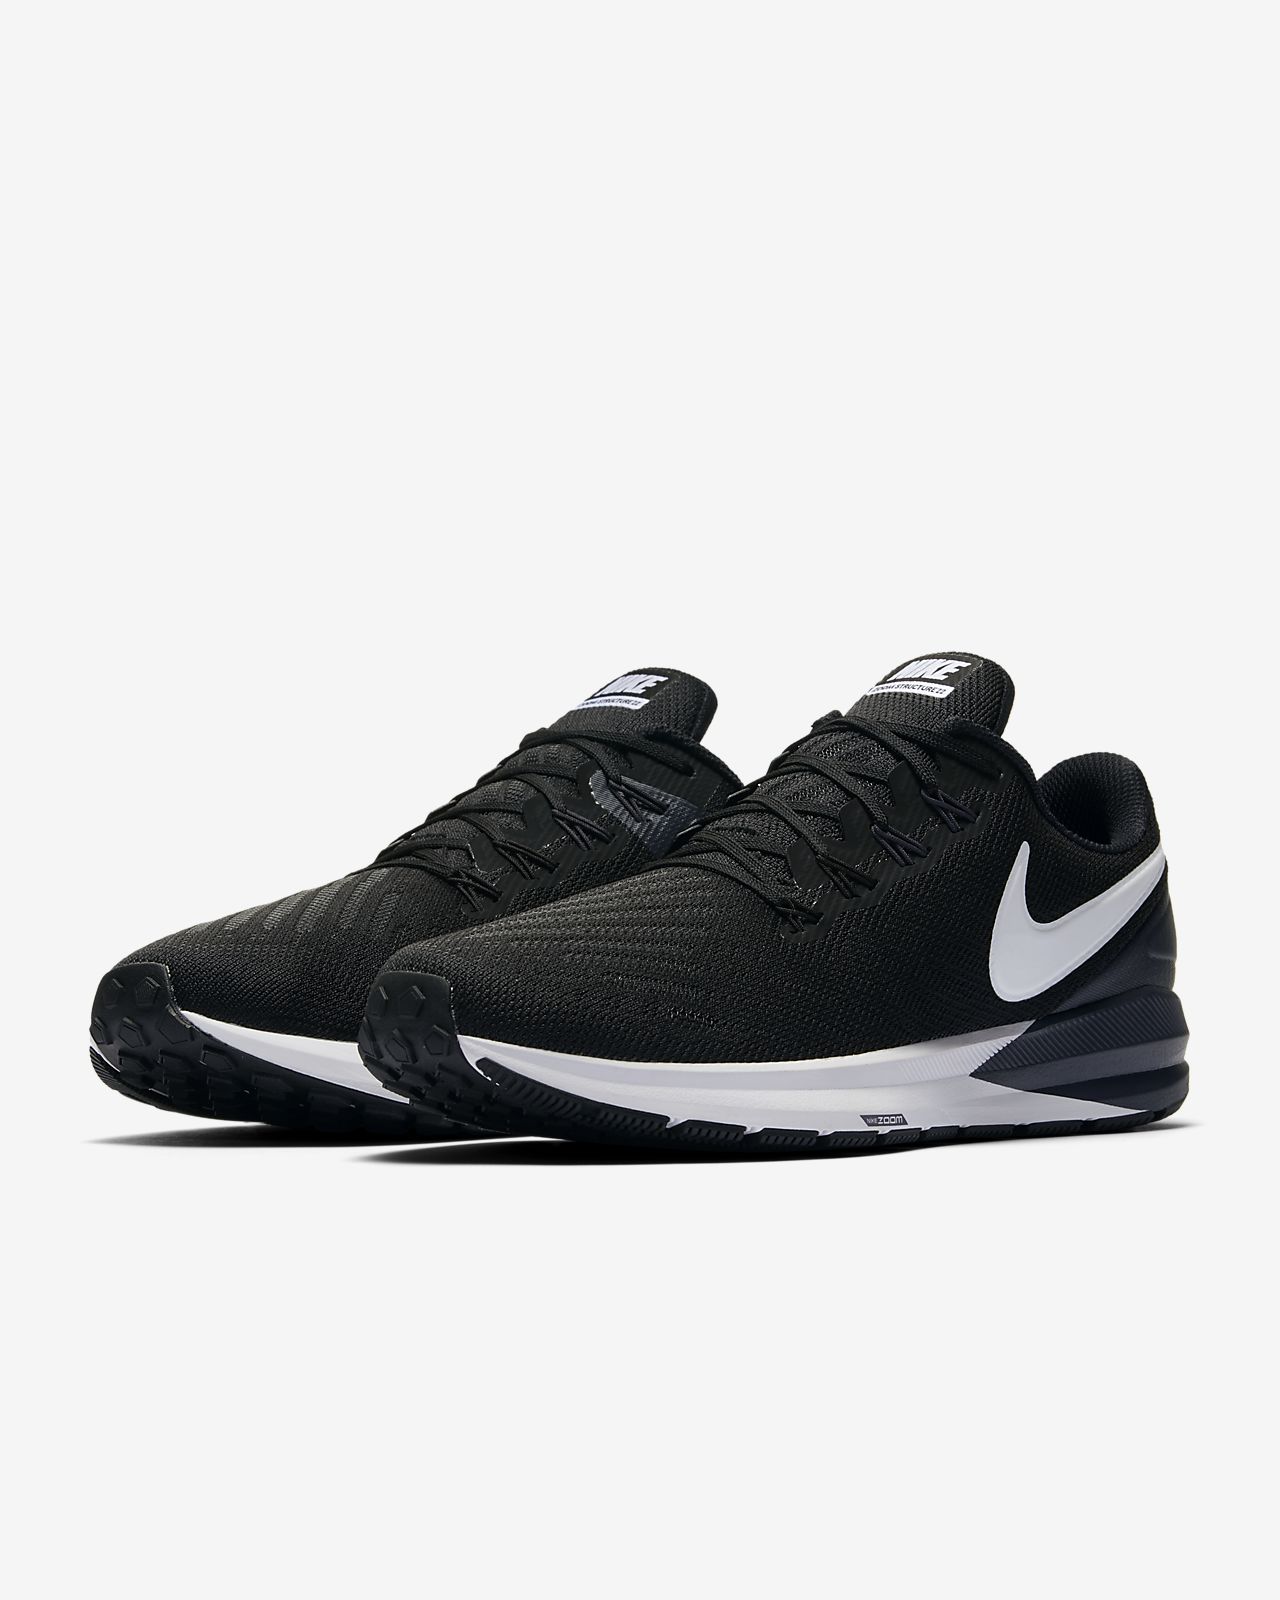 nike air zoom structure 22 men's running shoe